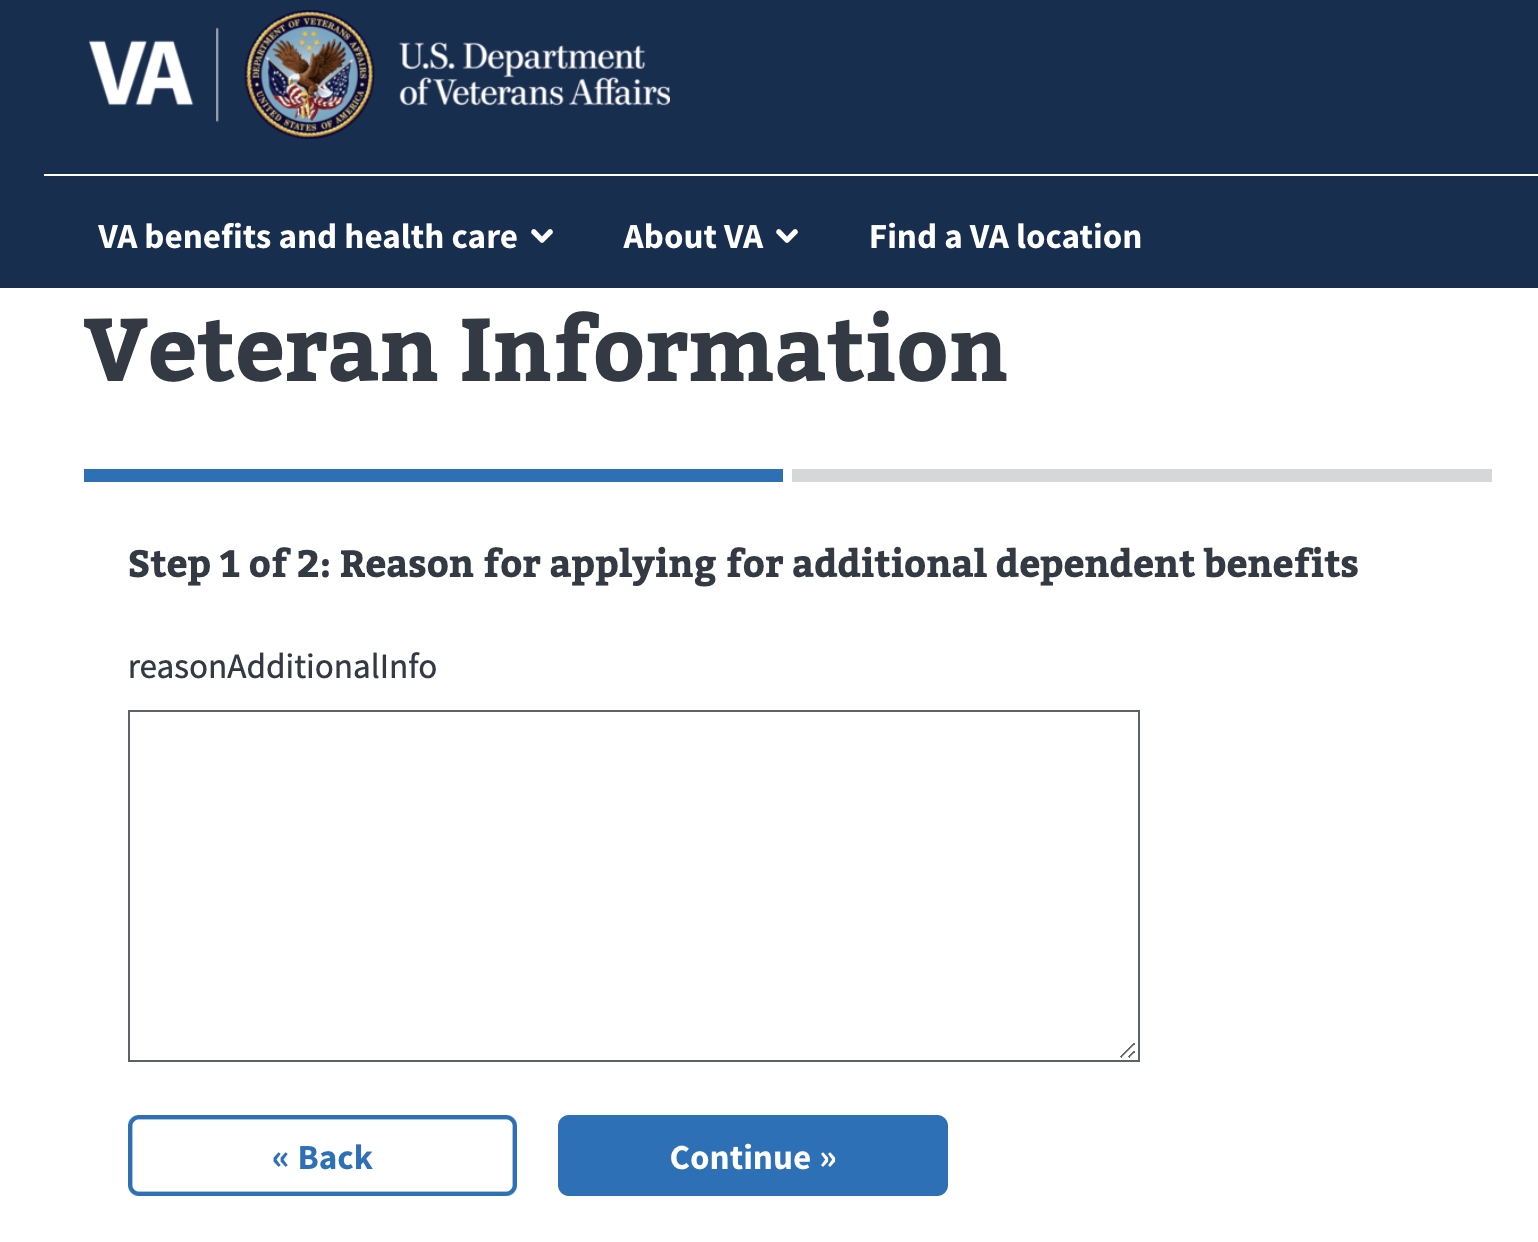 Screen shot that shows a Veteran Information form, Step 1 of 2, Reason for applying for additional dependent benefits. Below that, there is a text area box approximately five lines in height for the user to input text